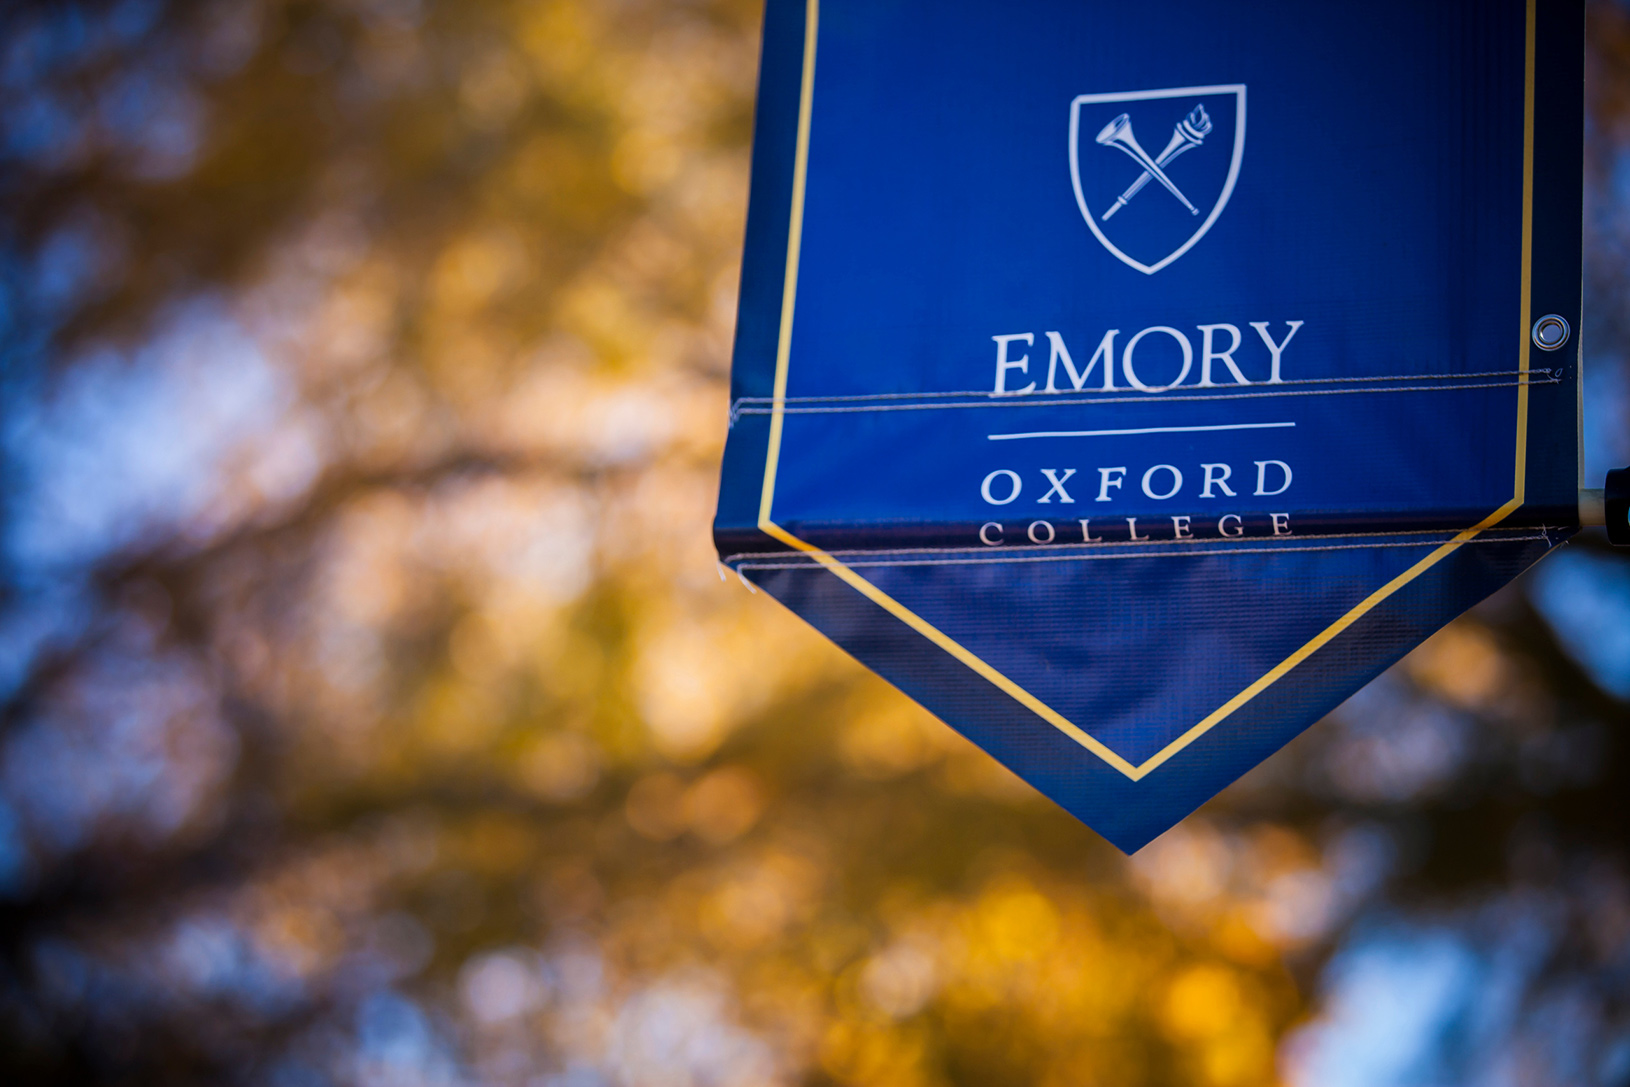 Banner of Emory Oxford College against leaves